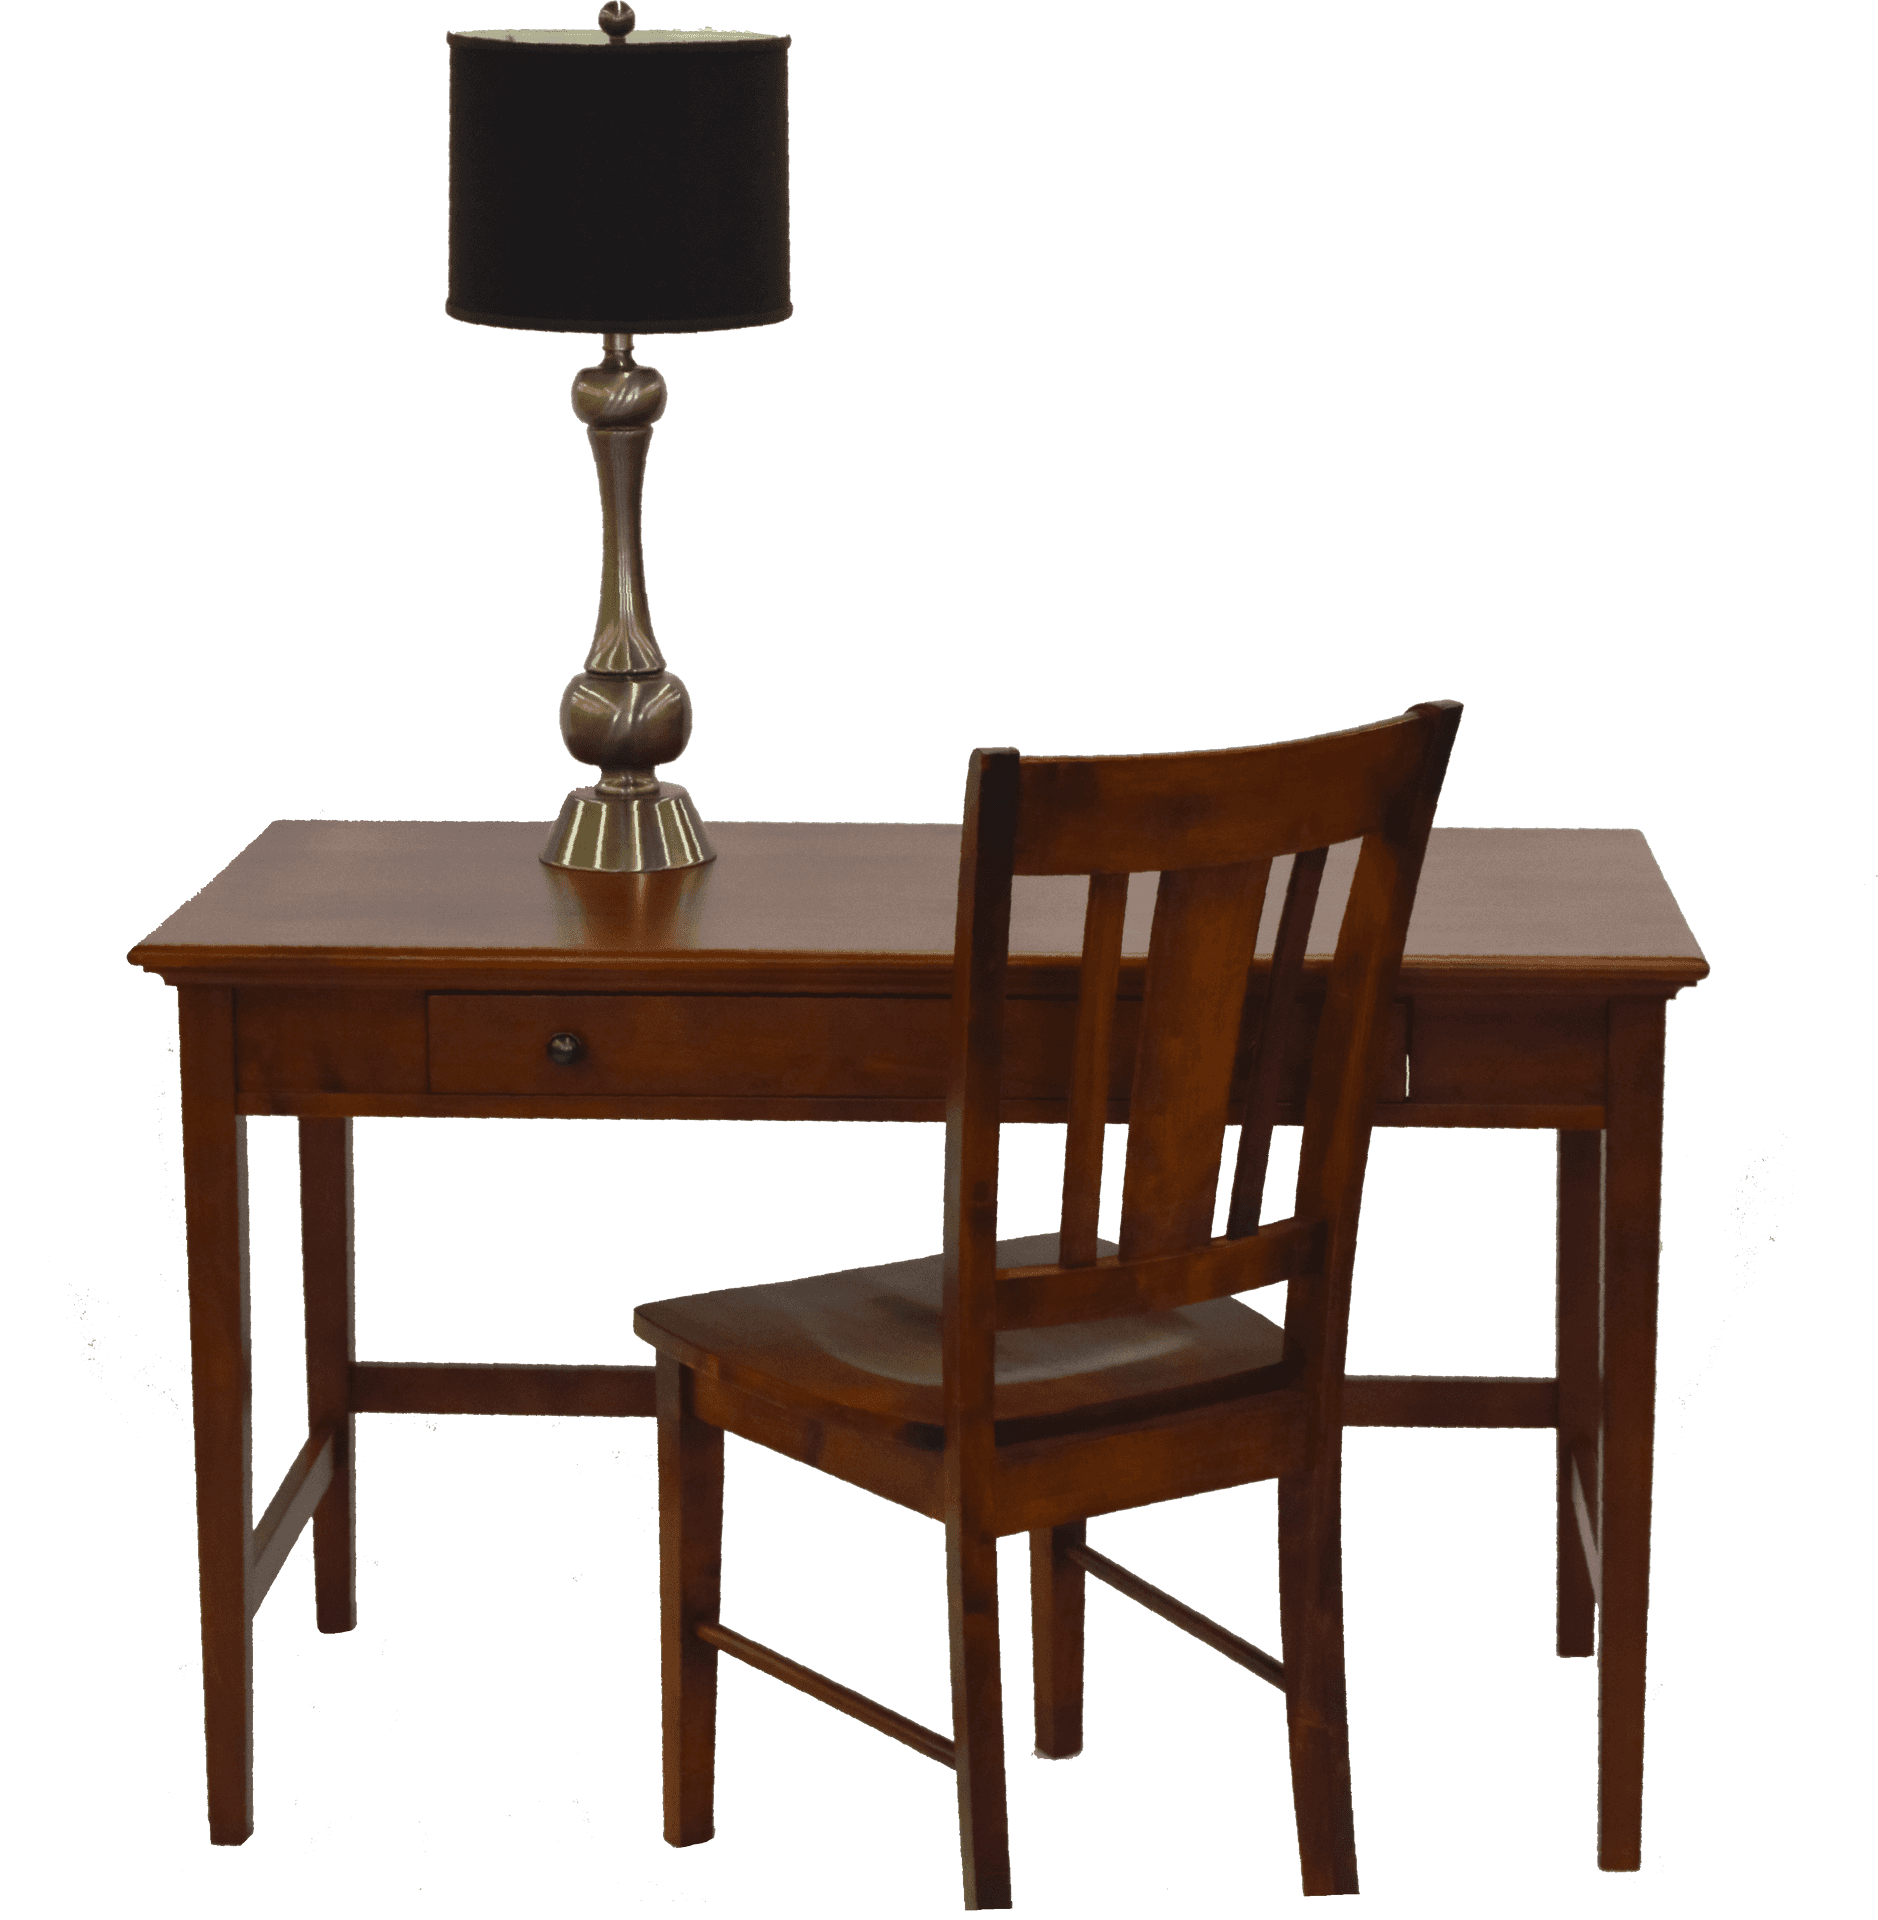 Wooden Deskand Chairwith Lamp PNG